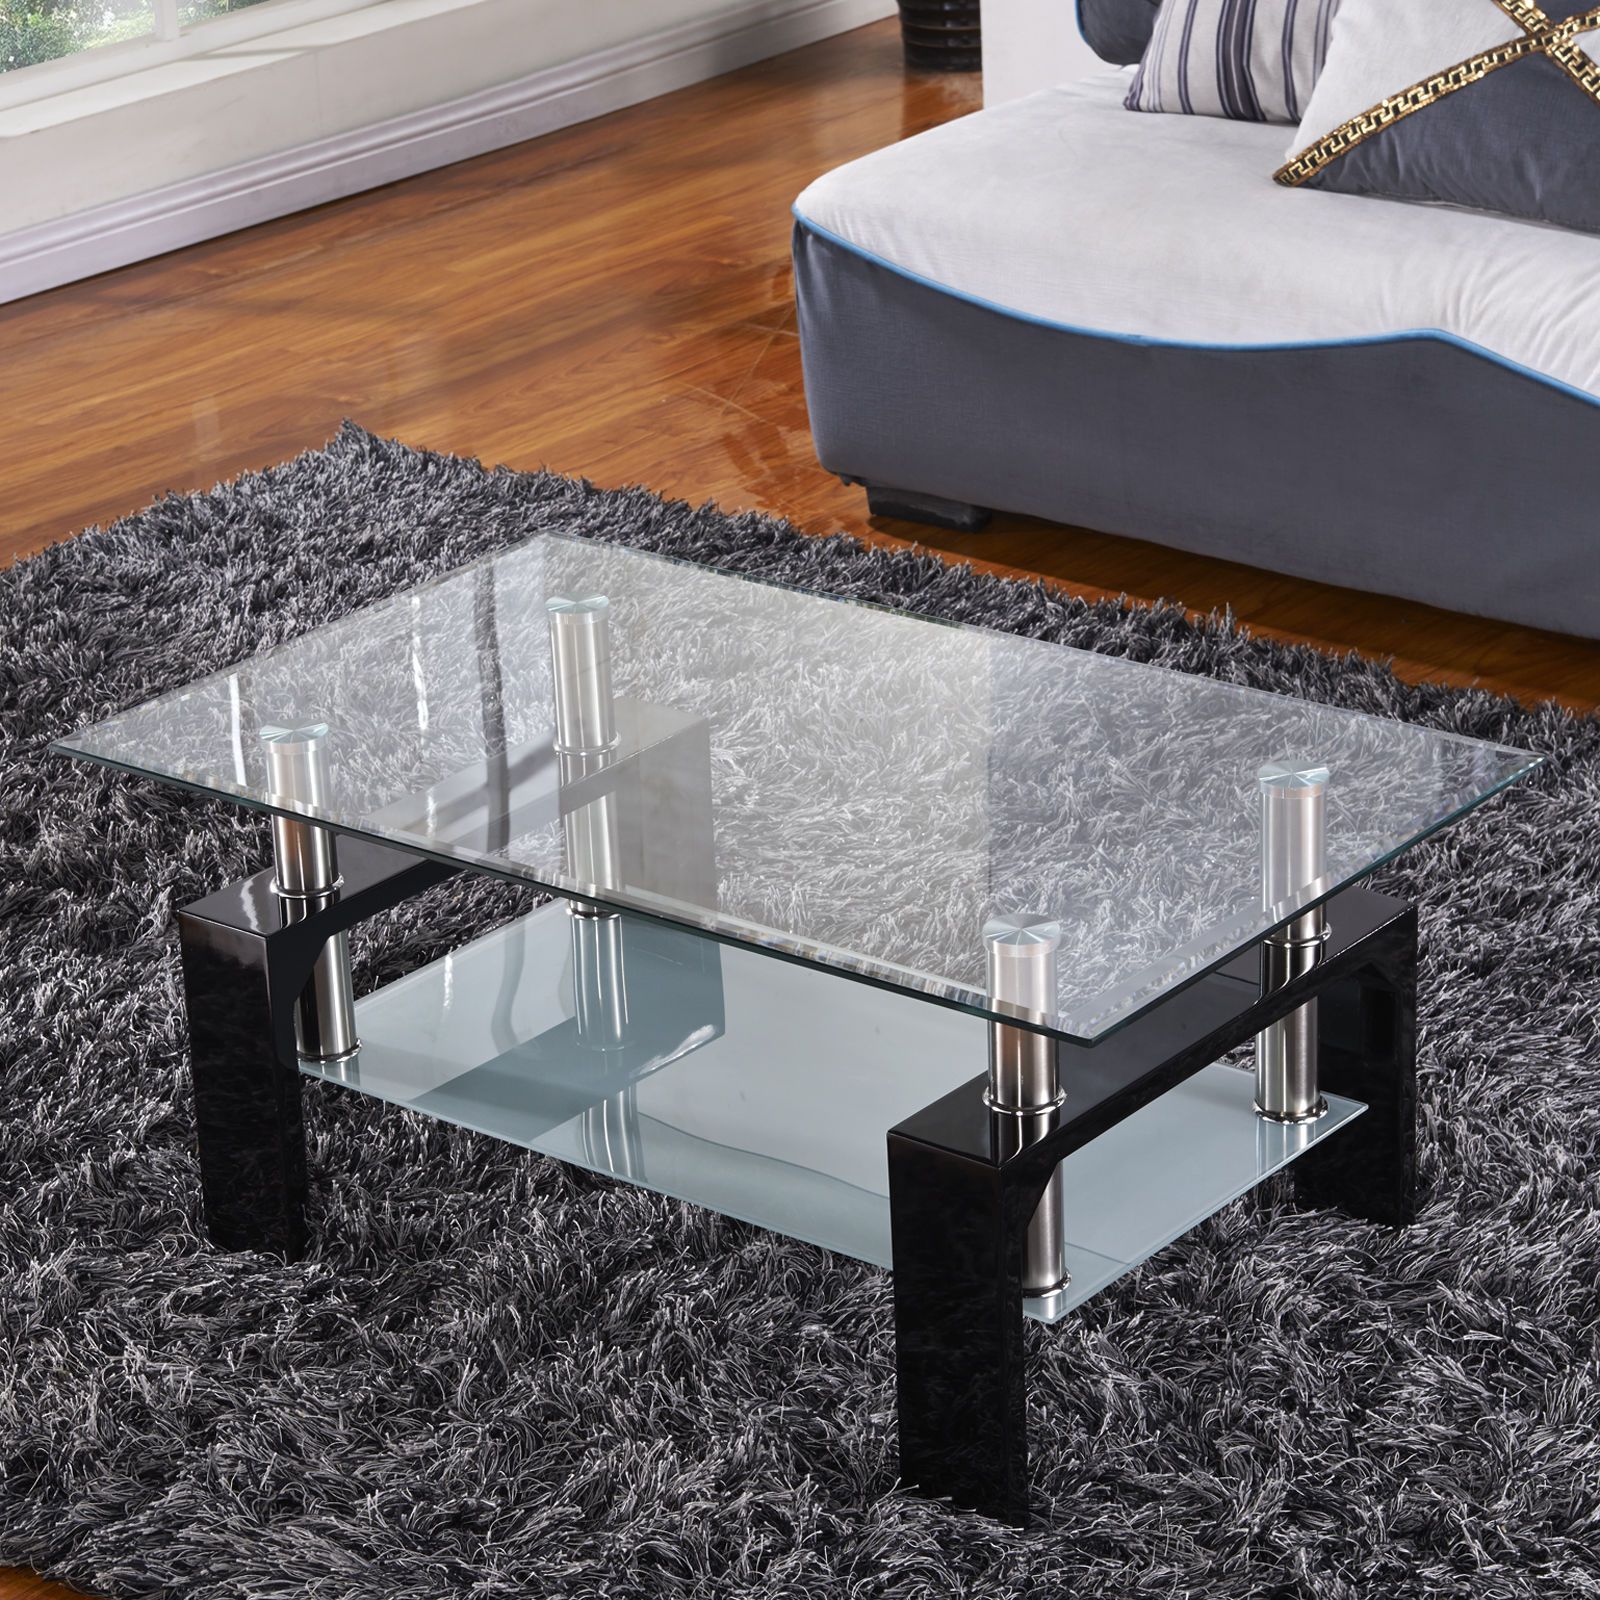 Newest Chrome And Glass Rectangular Coffee Tables For Design Glass Top Black Legs Coffee Table Rectangular (View 5 of 20)